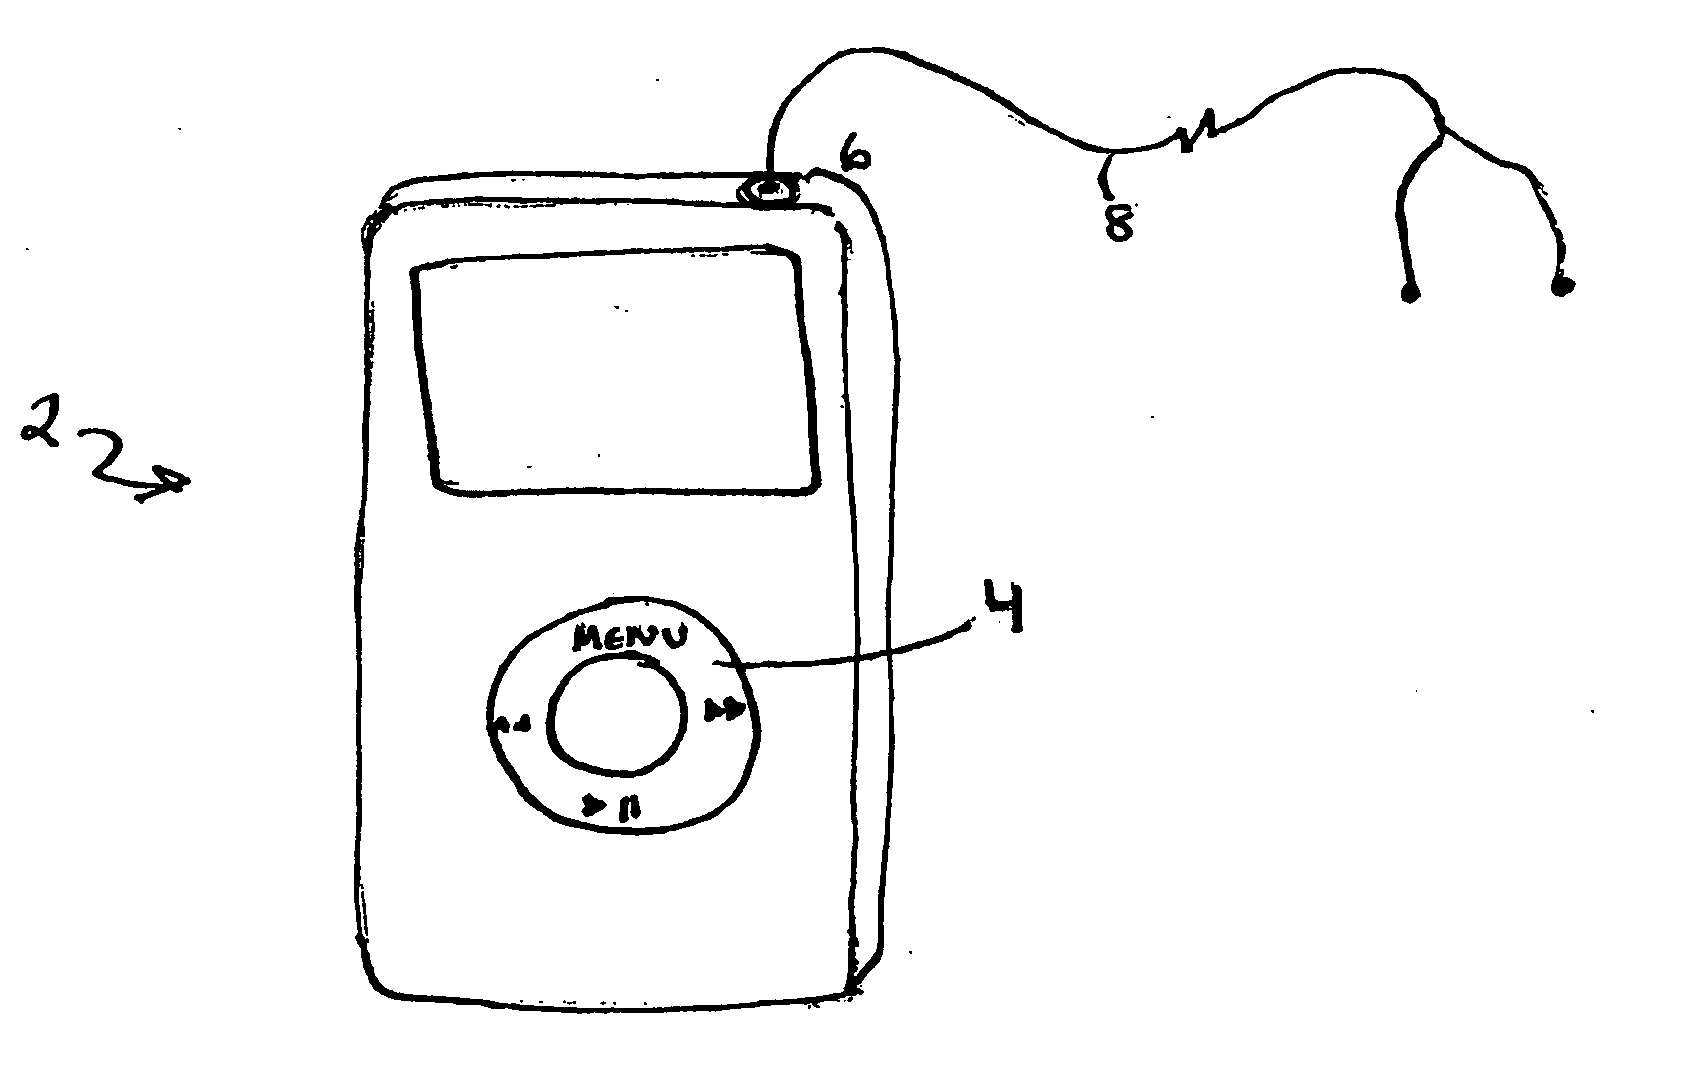 Article of apparel for holding and operating electronic devices